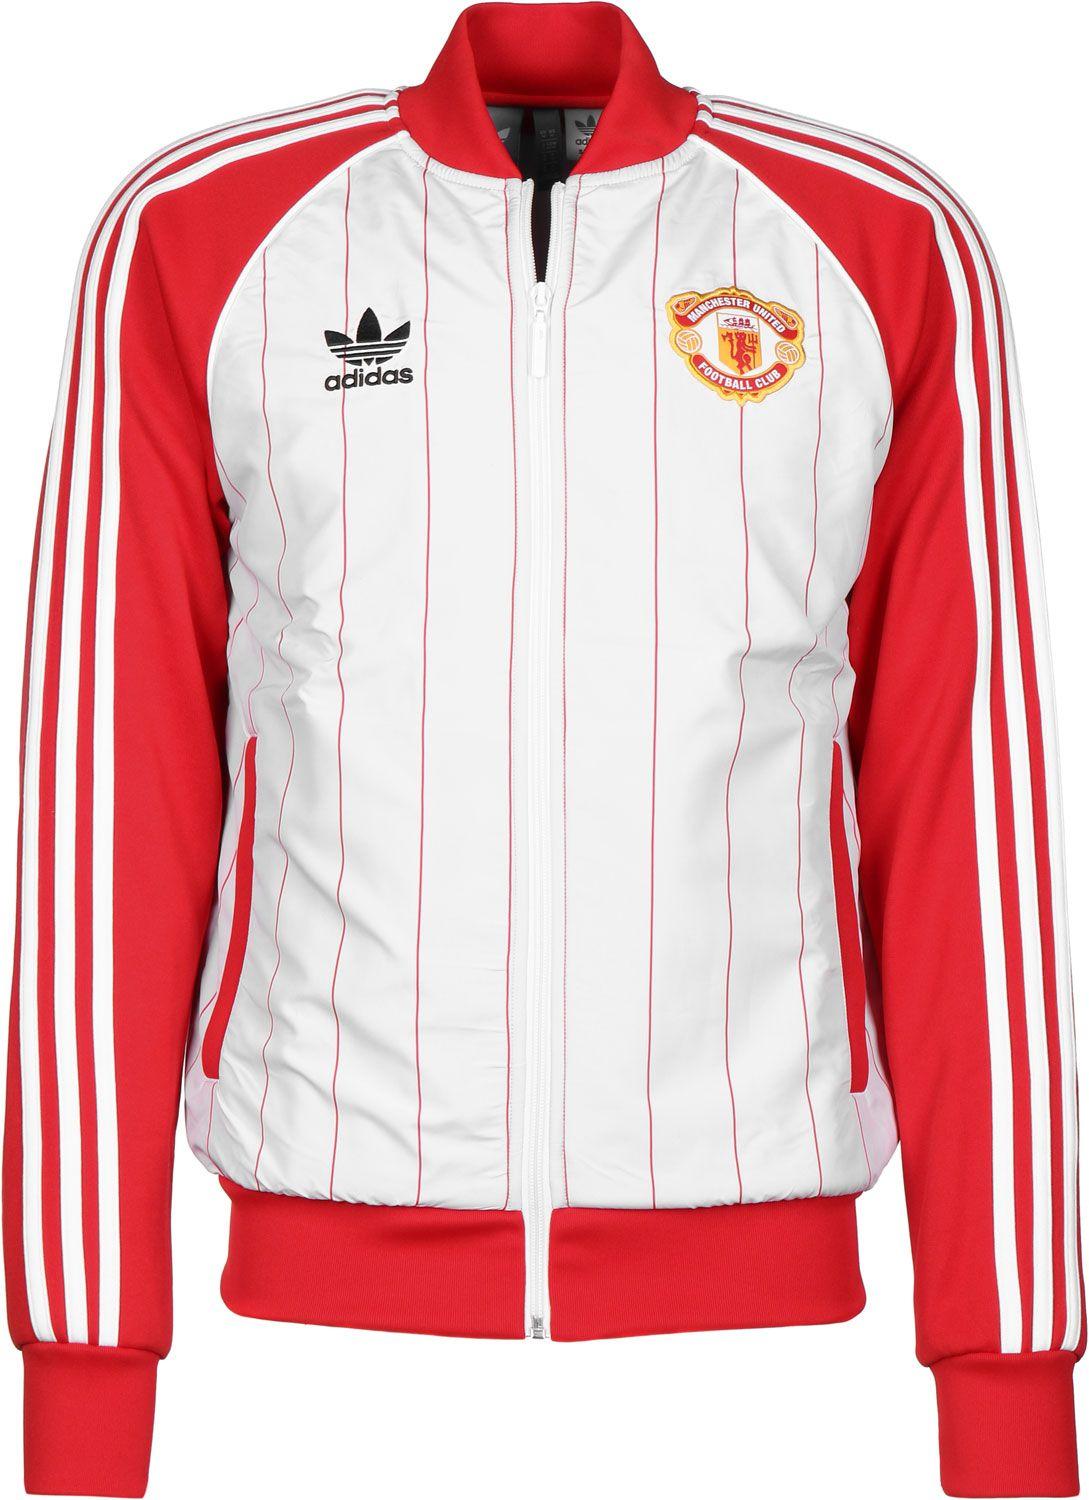 Red and White TT Logo - adidas Manchester United TT track top red white | WeAre Shop